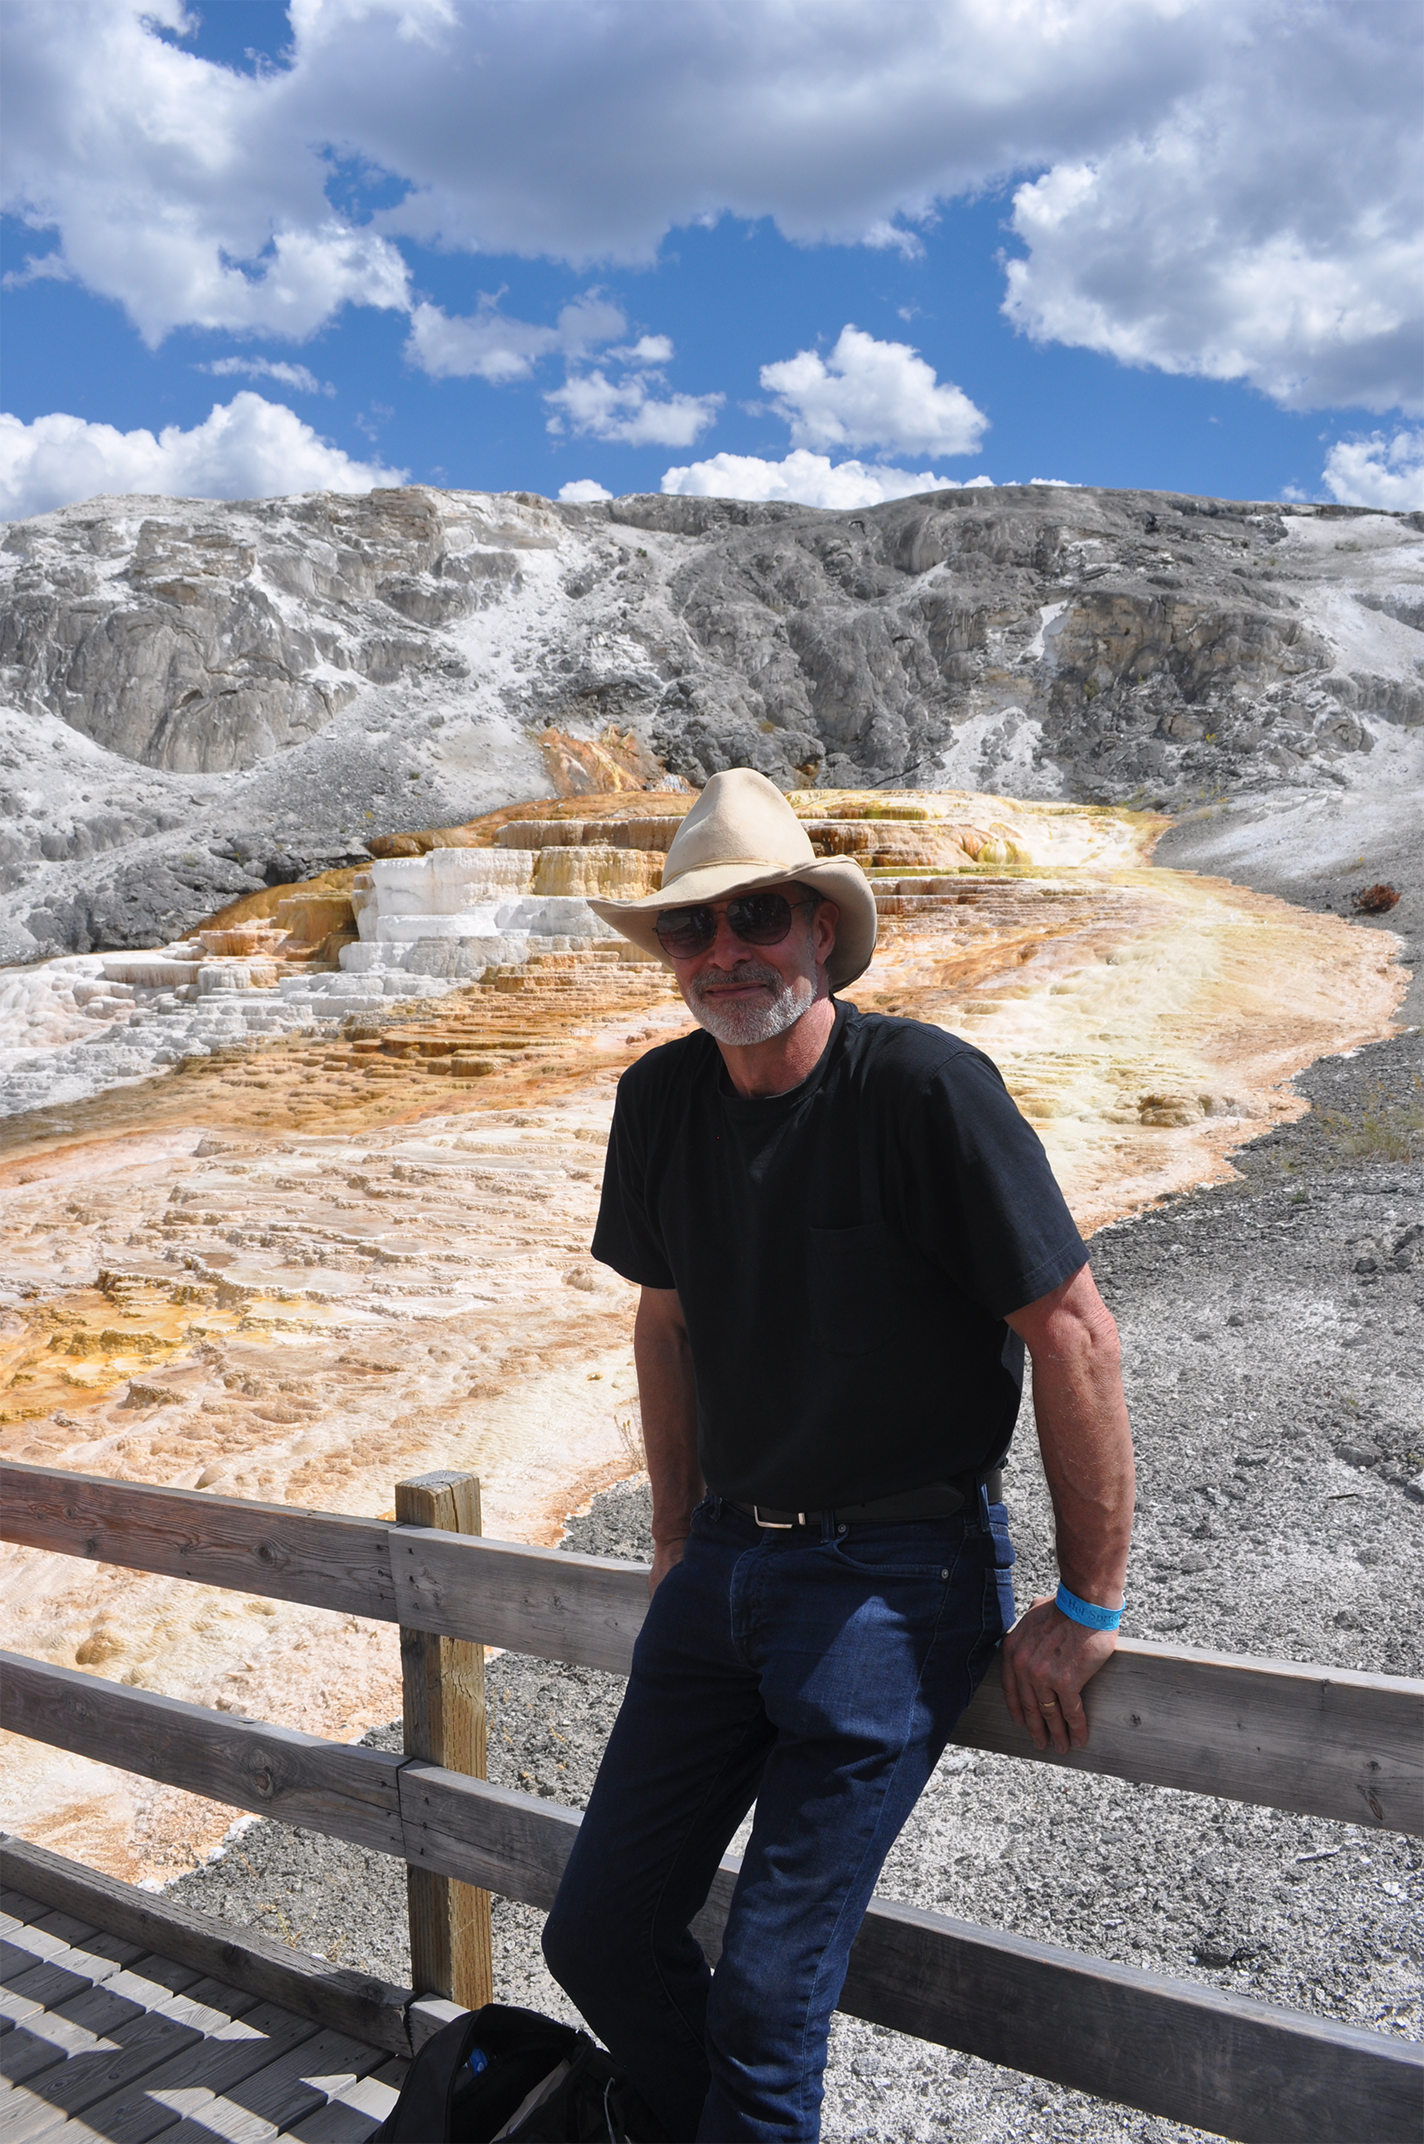 Robert Hazen in front of a travertine hot spring (depositing terraced limestone) in Yellowstone National Park.